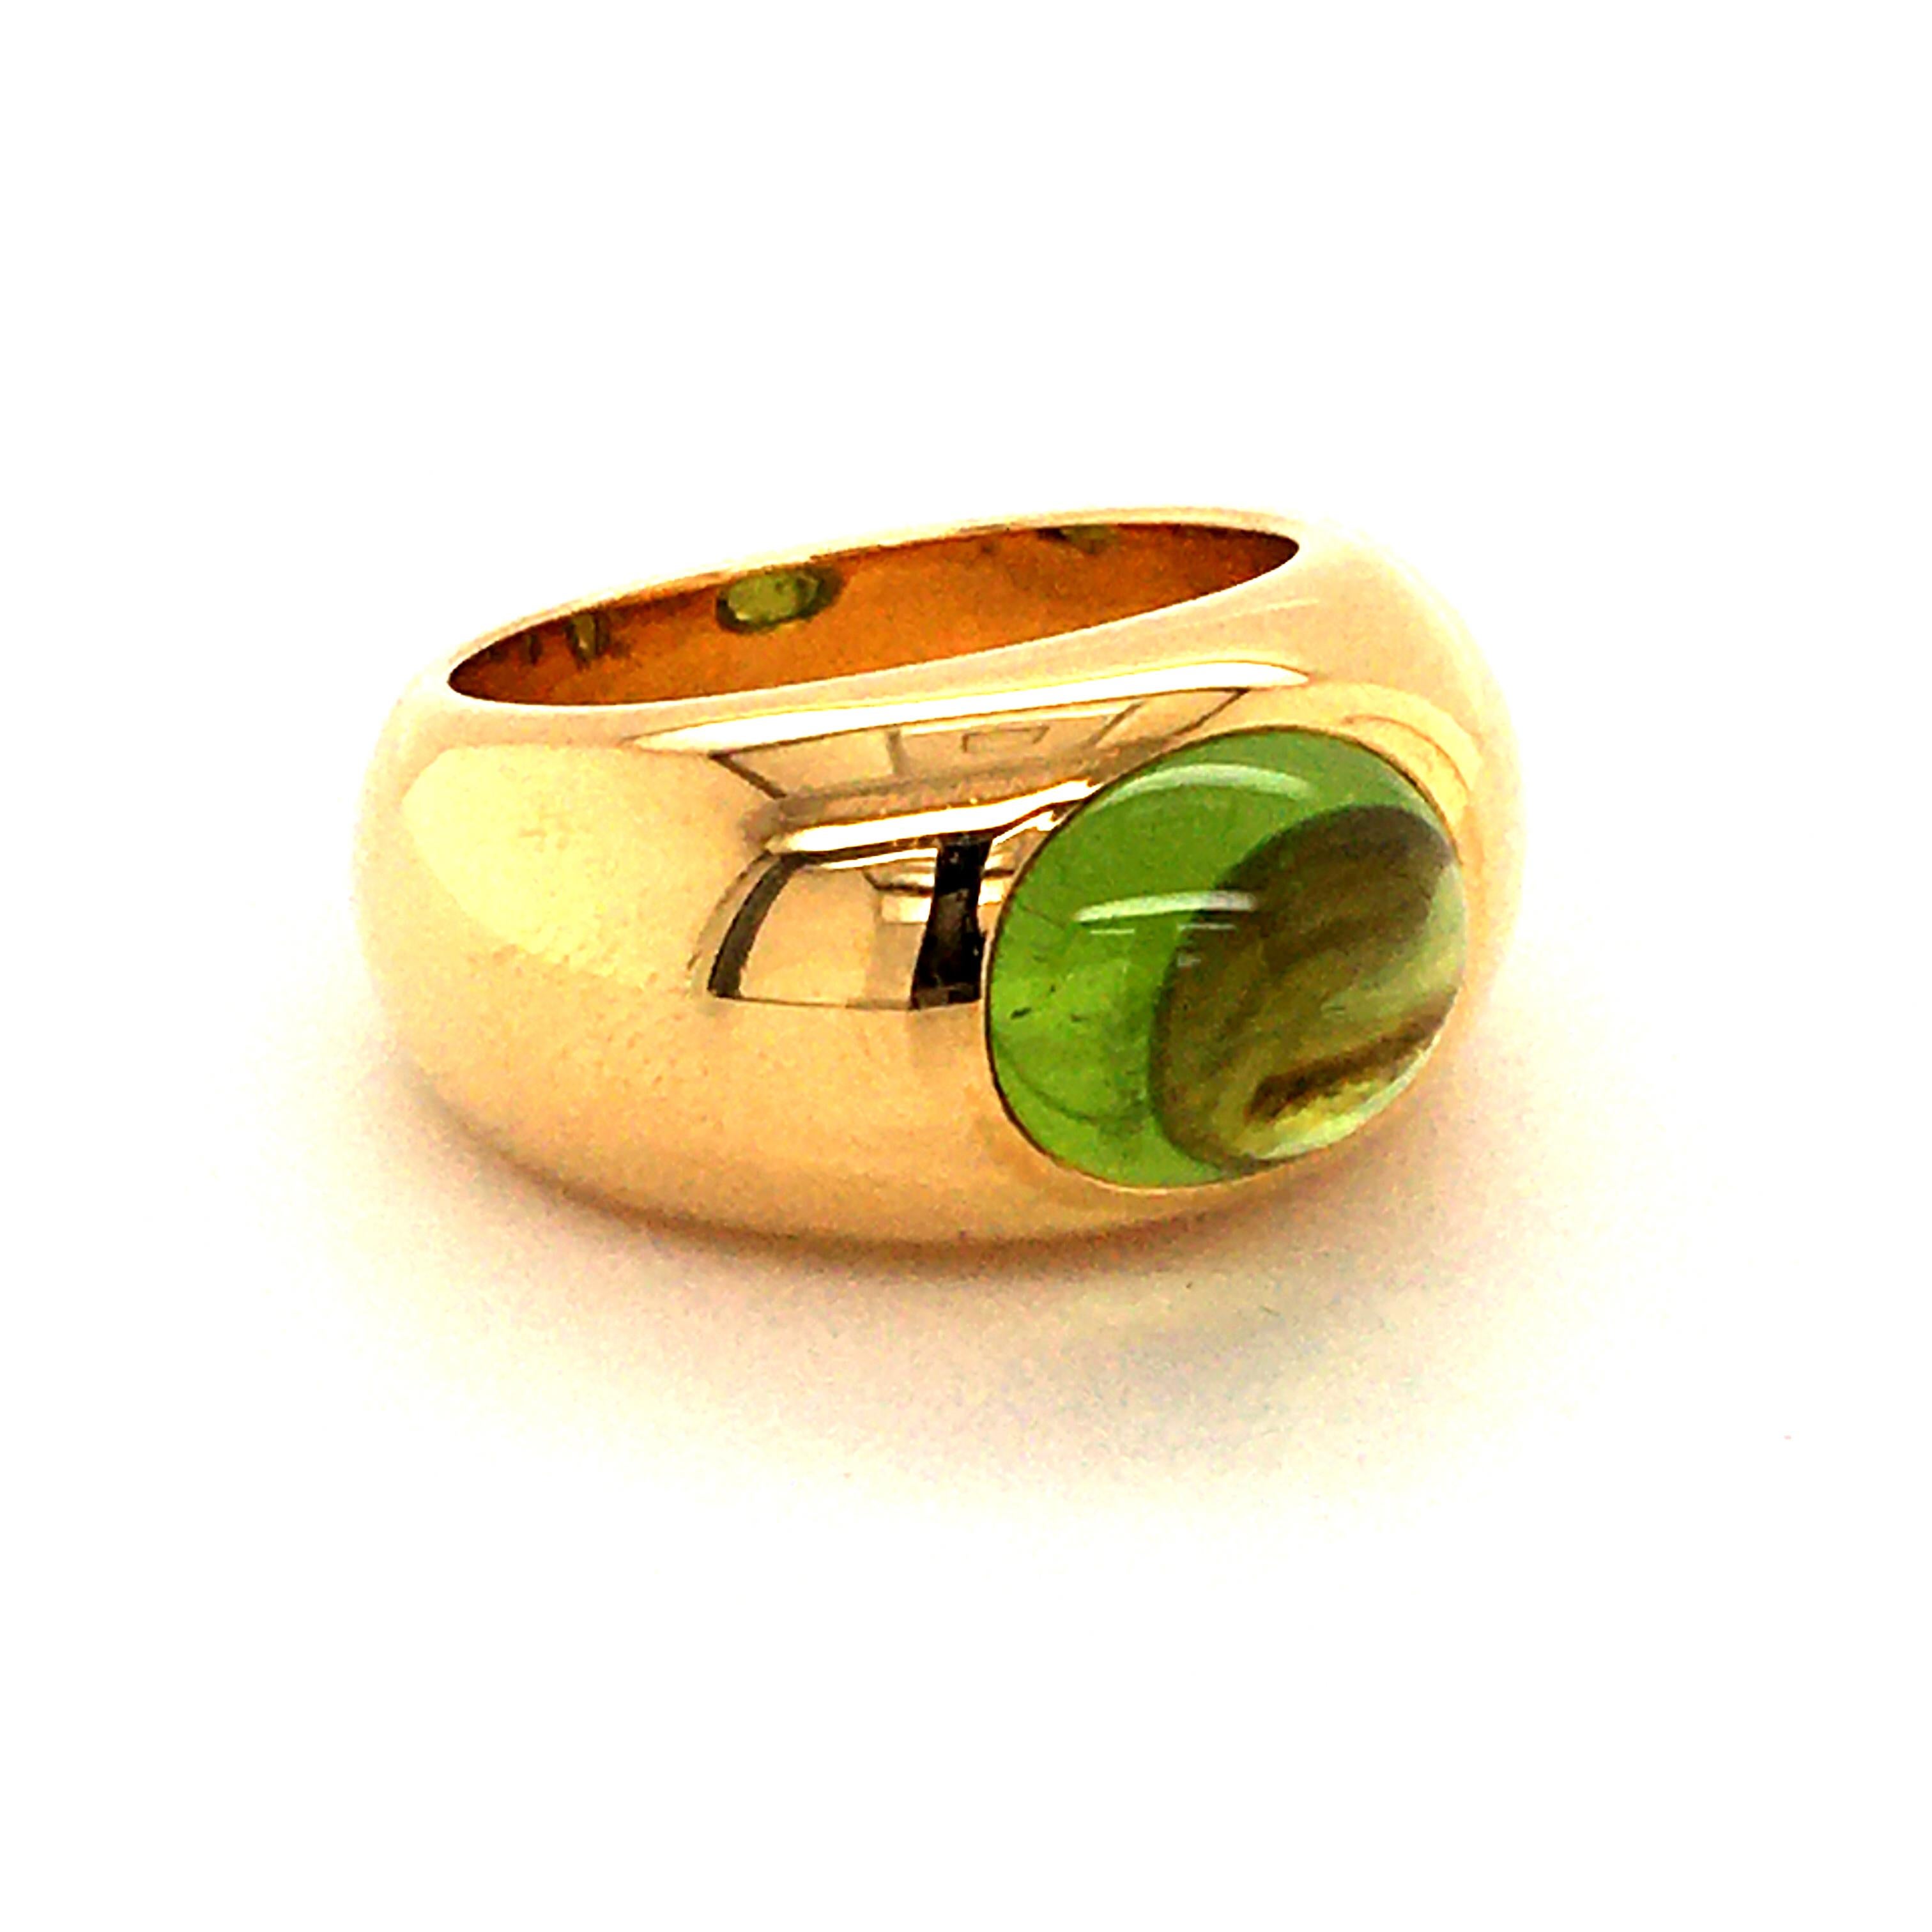 This timeless ring is made by Swiss Jeweller Bucherer in yellow gold 750 and set with 1 oval cabochon cut peridot of approx. 5 ct.

Please, ask for additional pictures if you are interested in this item.

Weight: 25.12 grams
Ring Size: 53 / US 6.4